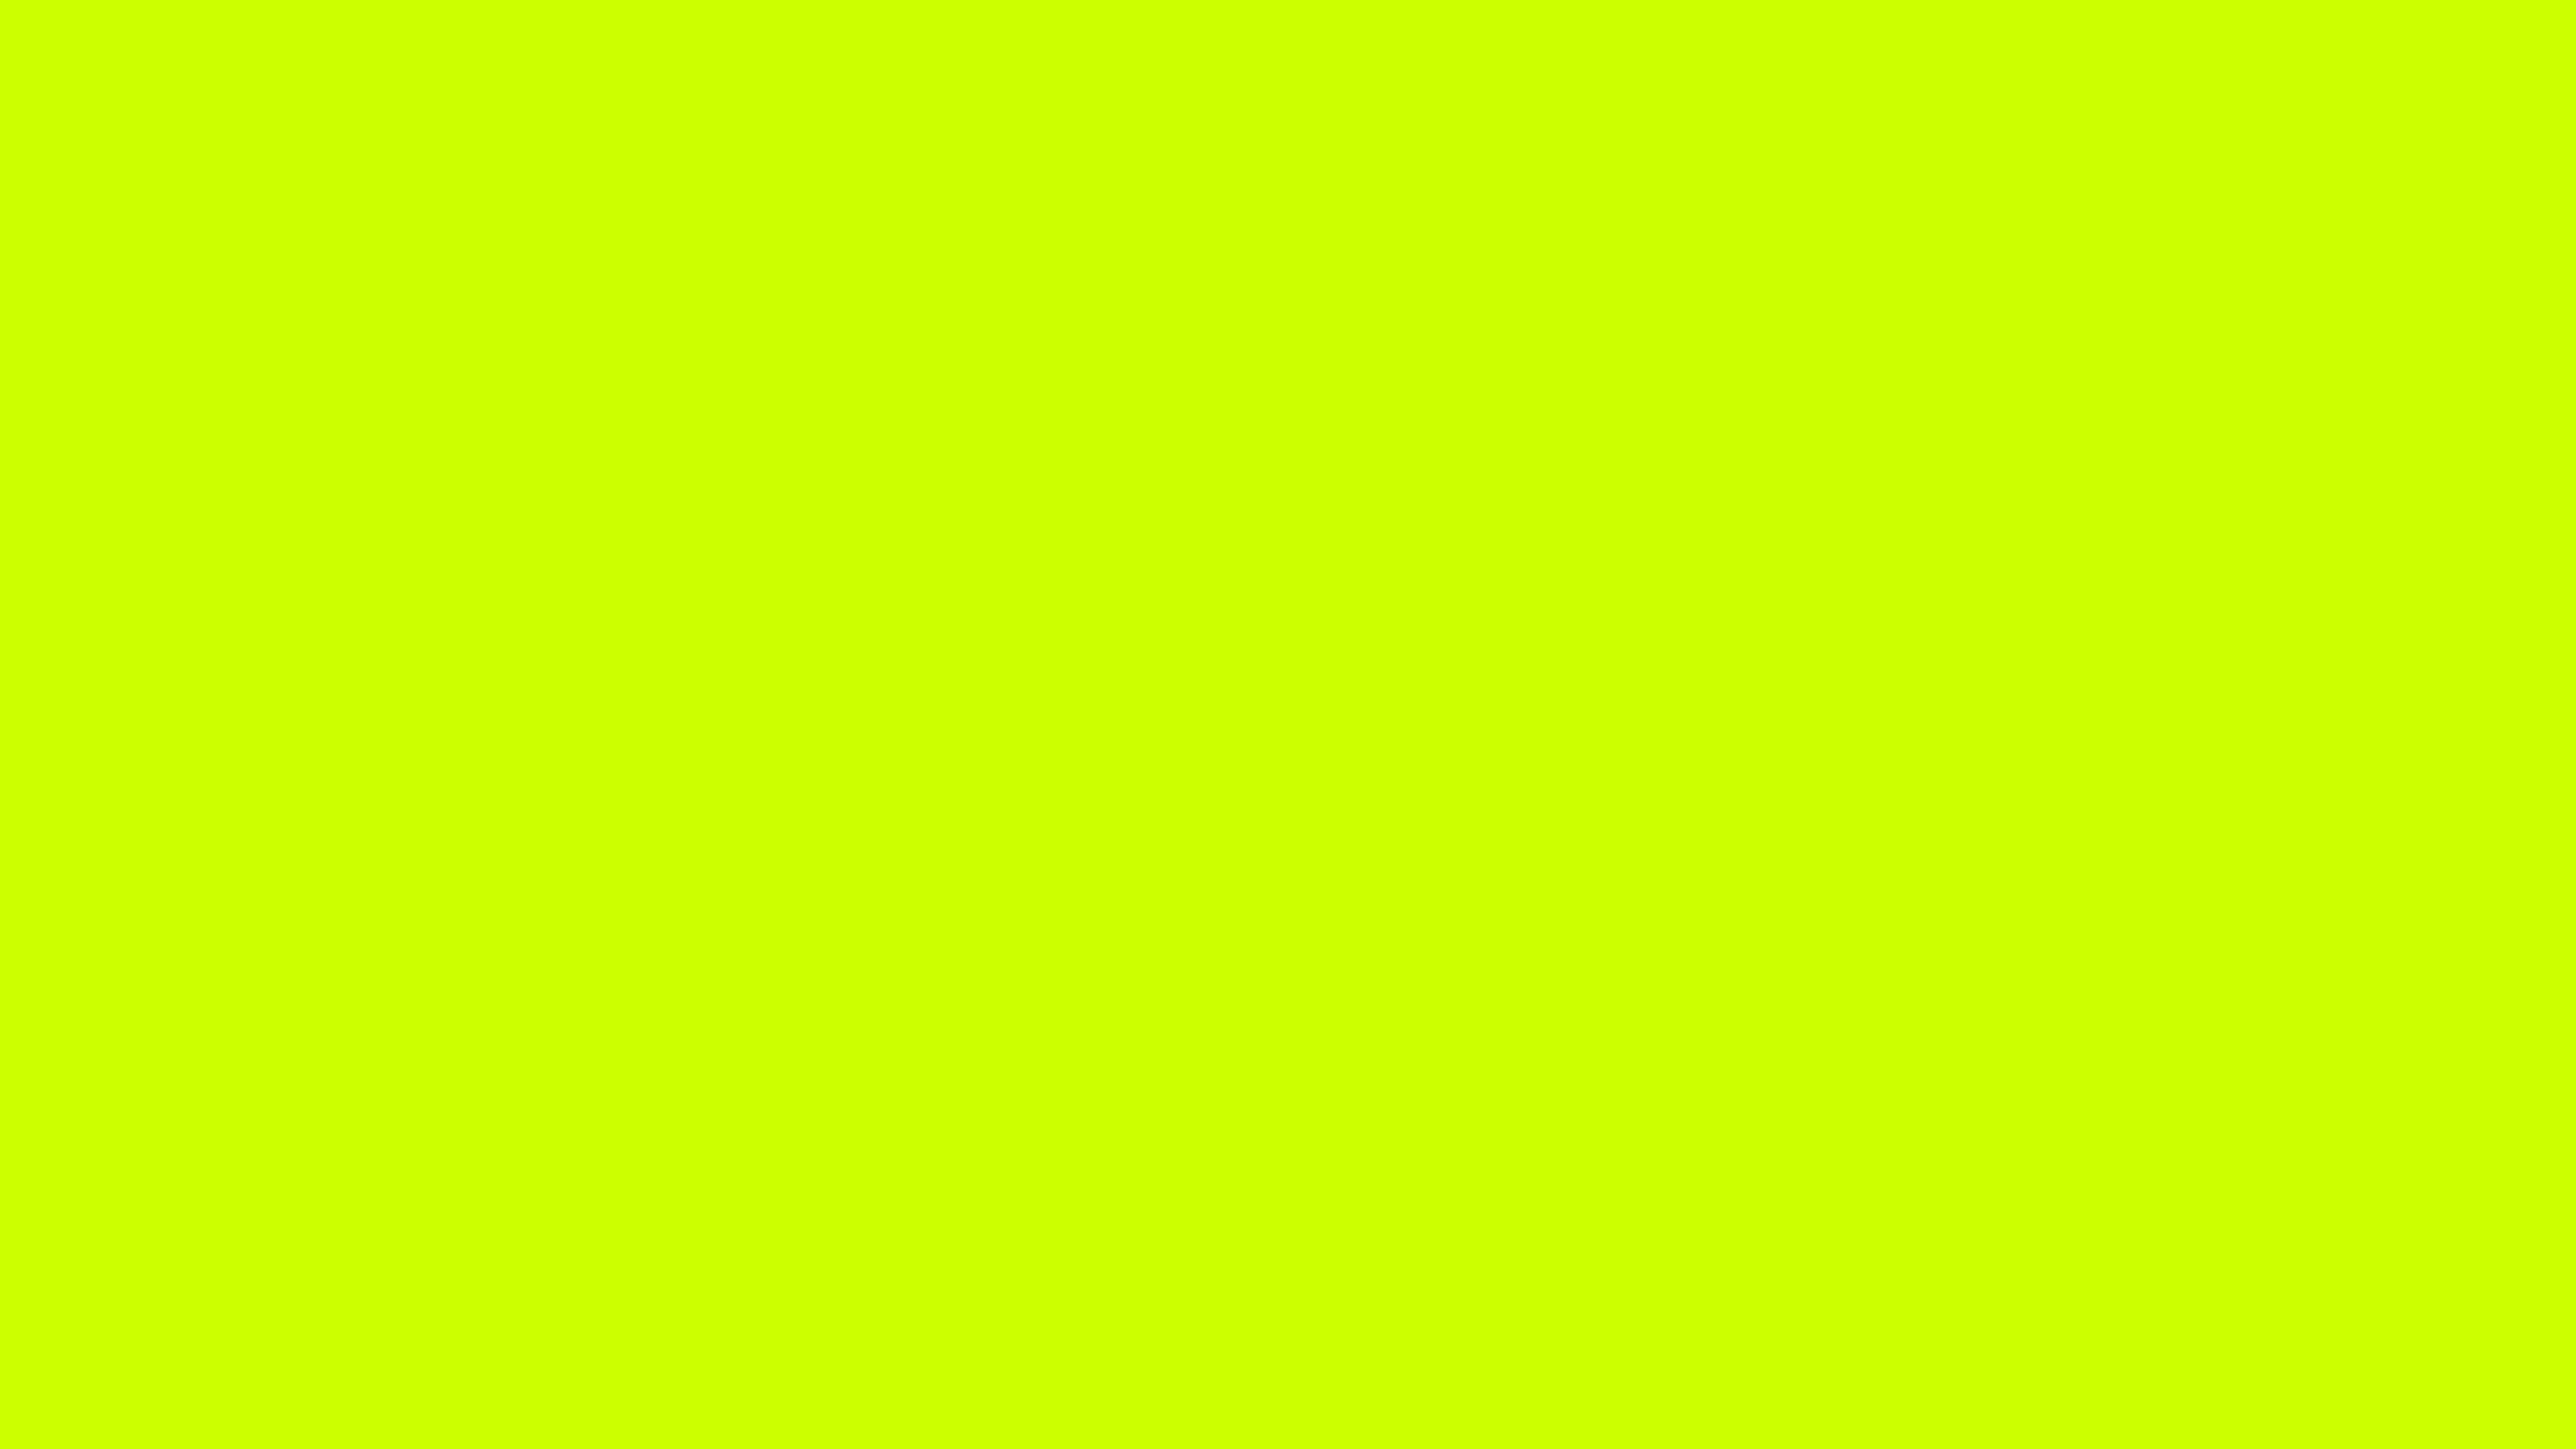 7680x4320 Electric Lime Solid Color Background